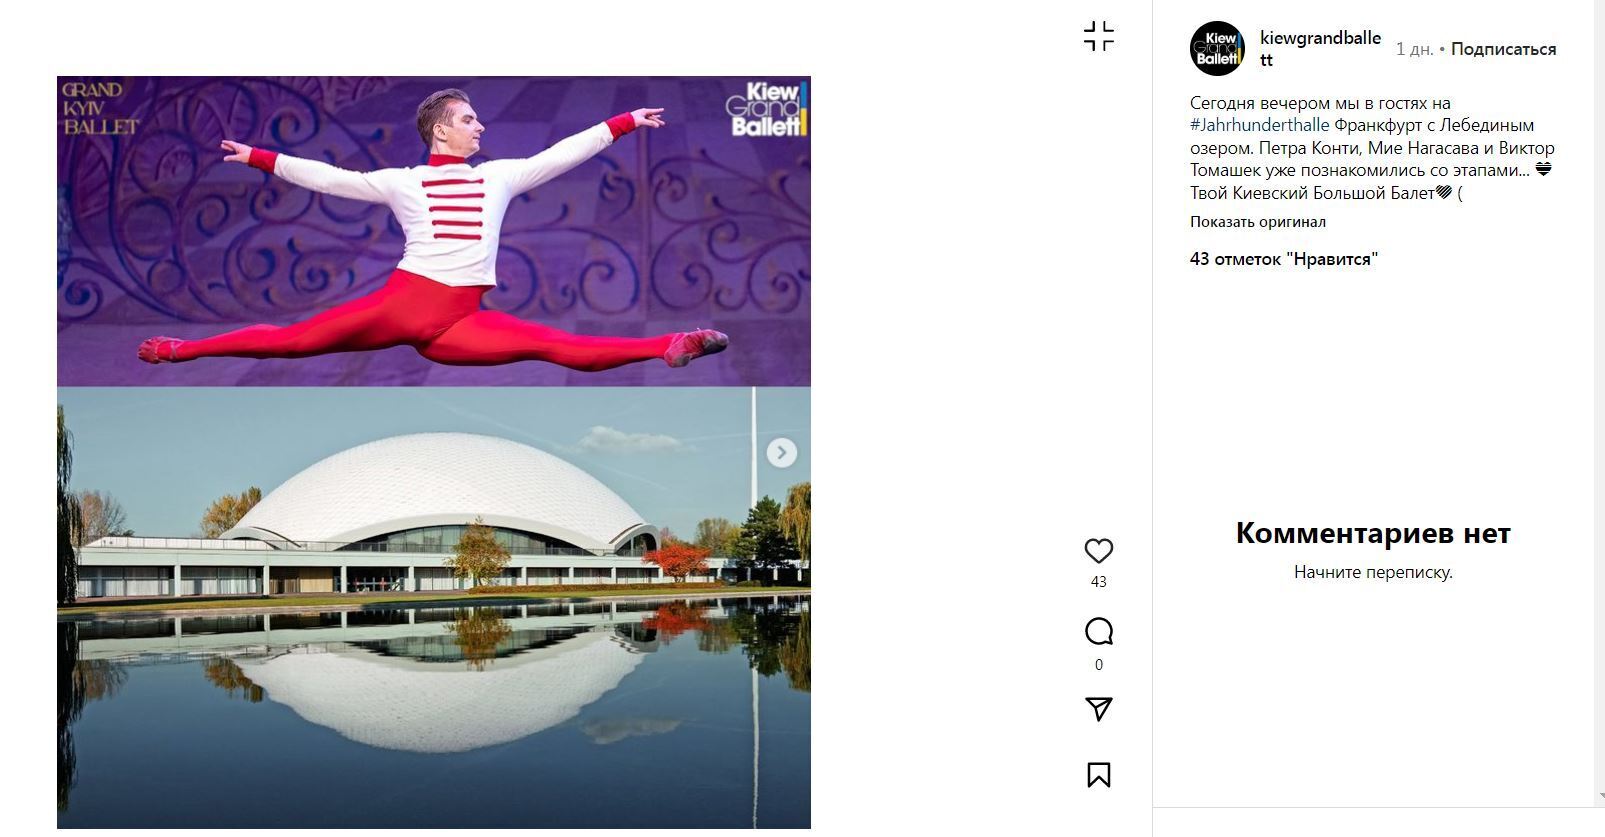 Alexander Stoyanov, the husband of Kateryna Kukhar, showcases ''Swan Lake'' and promotes the ideas of the ''Russian world'' in Europe